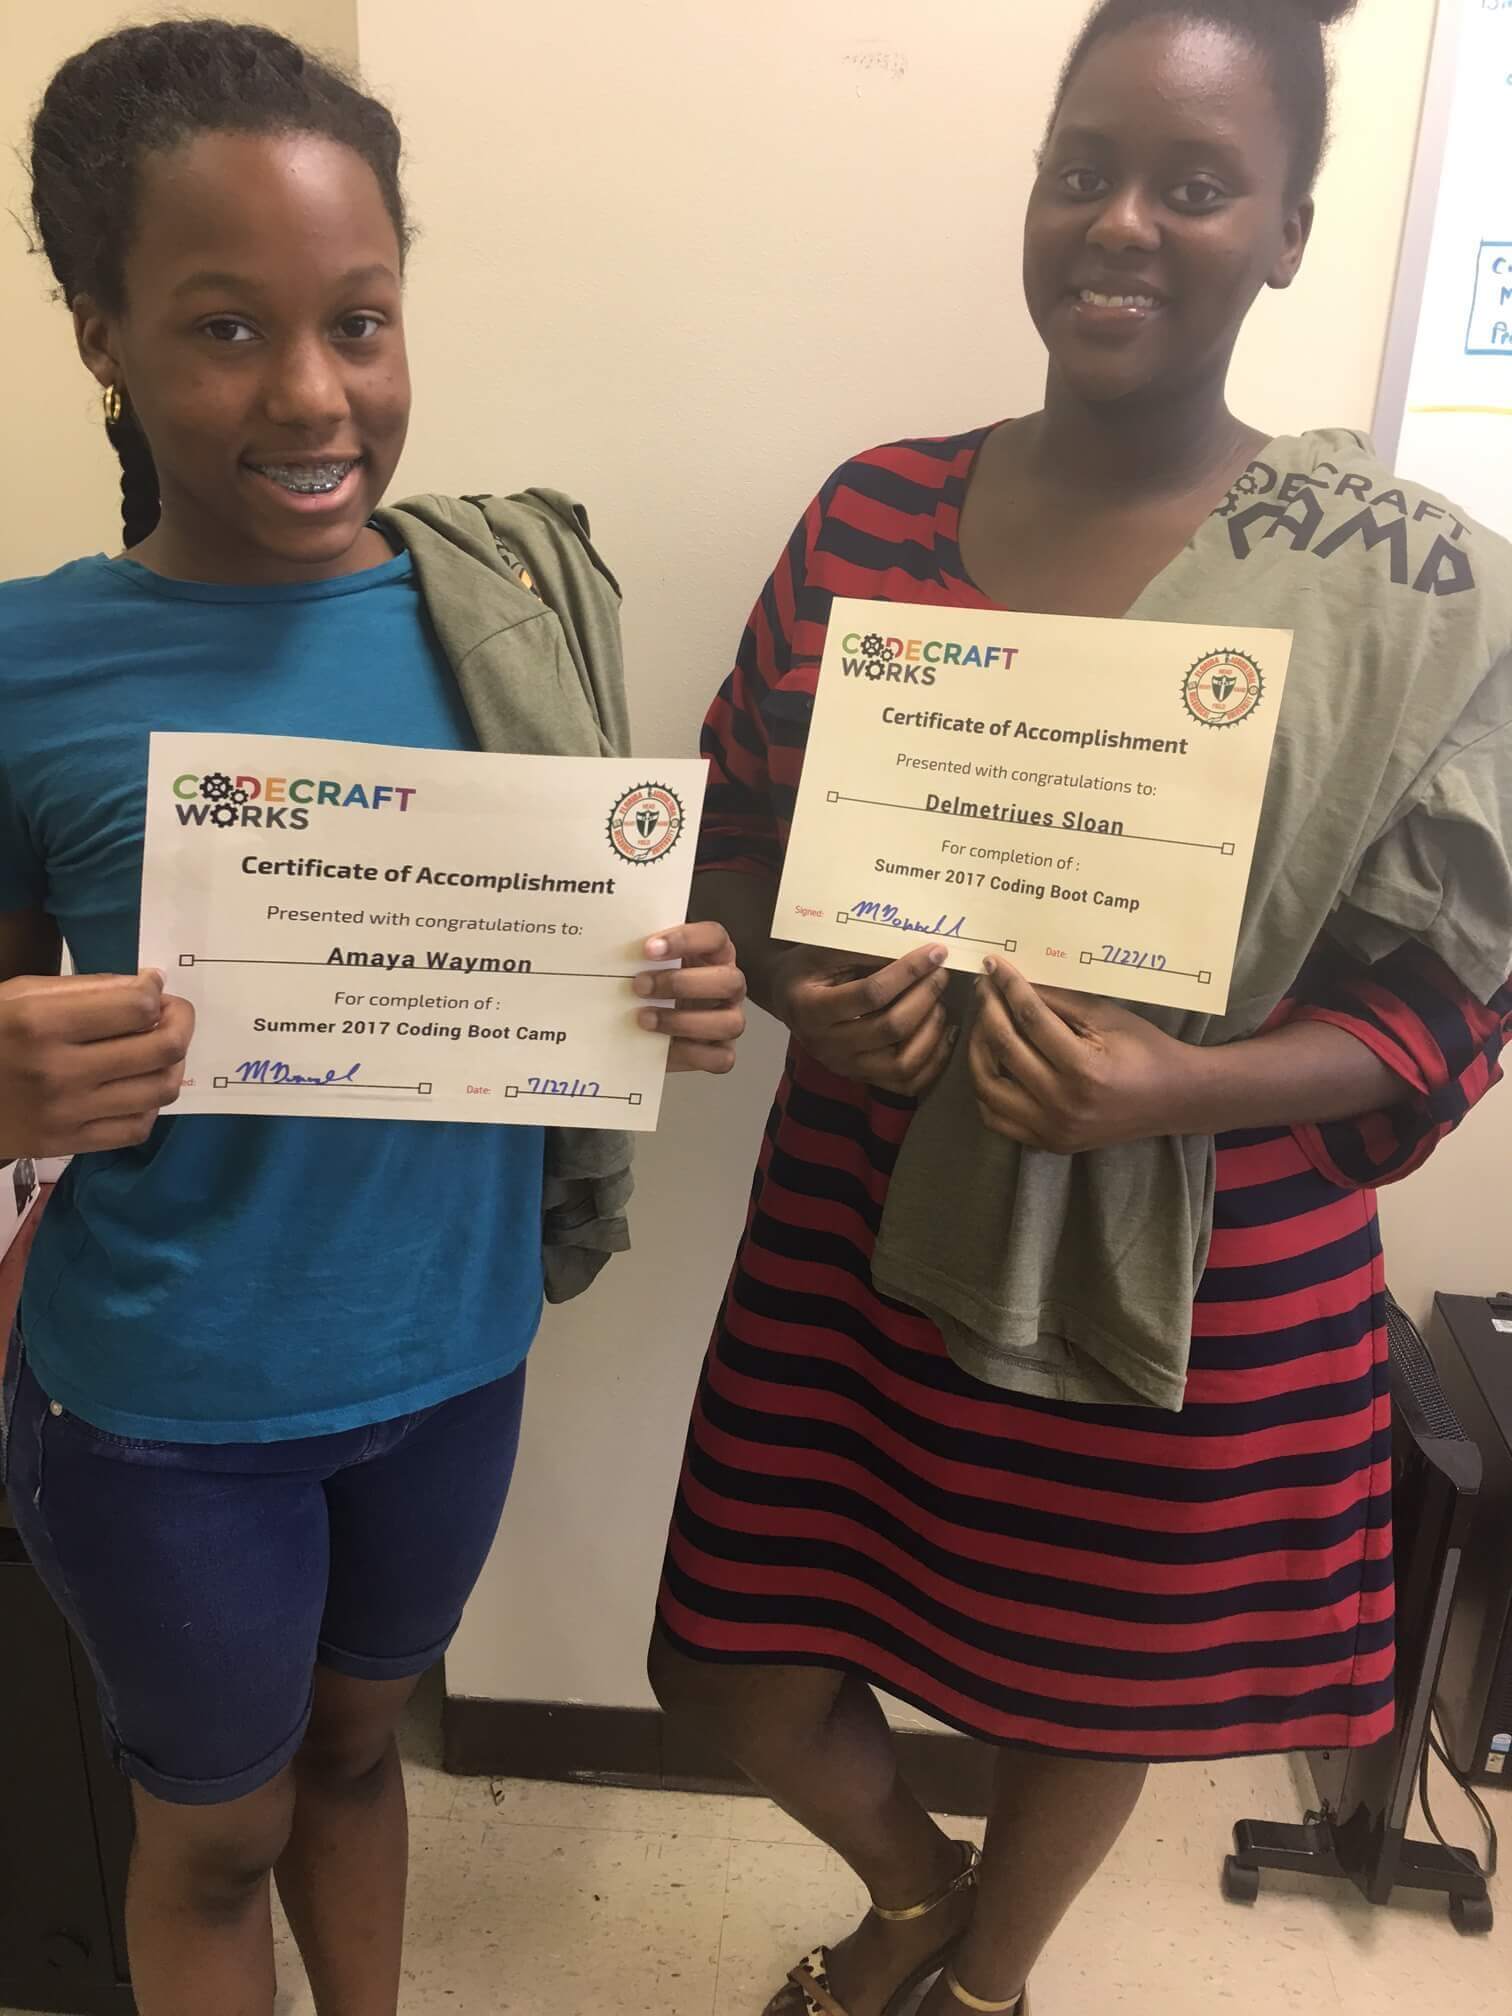 Photo of two Codecraft Works Certified middle school Students after a summer training in Tallahassee Florida